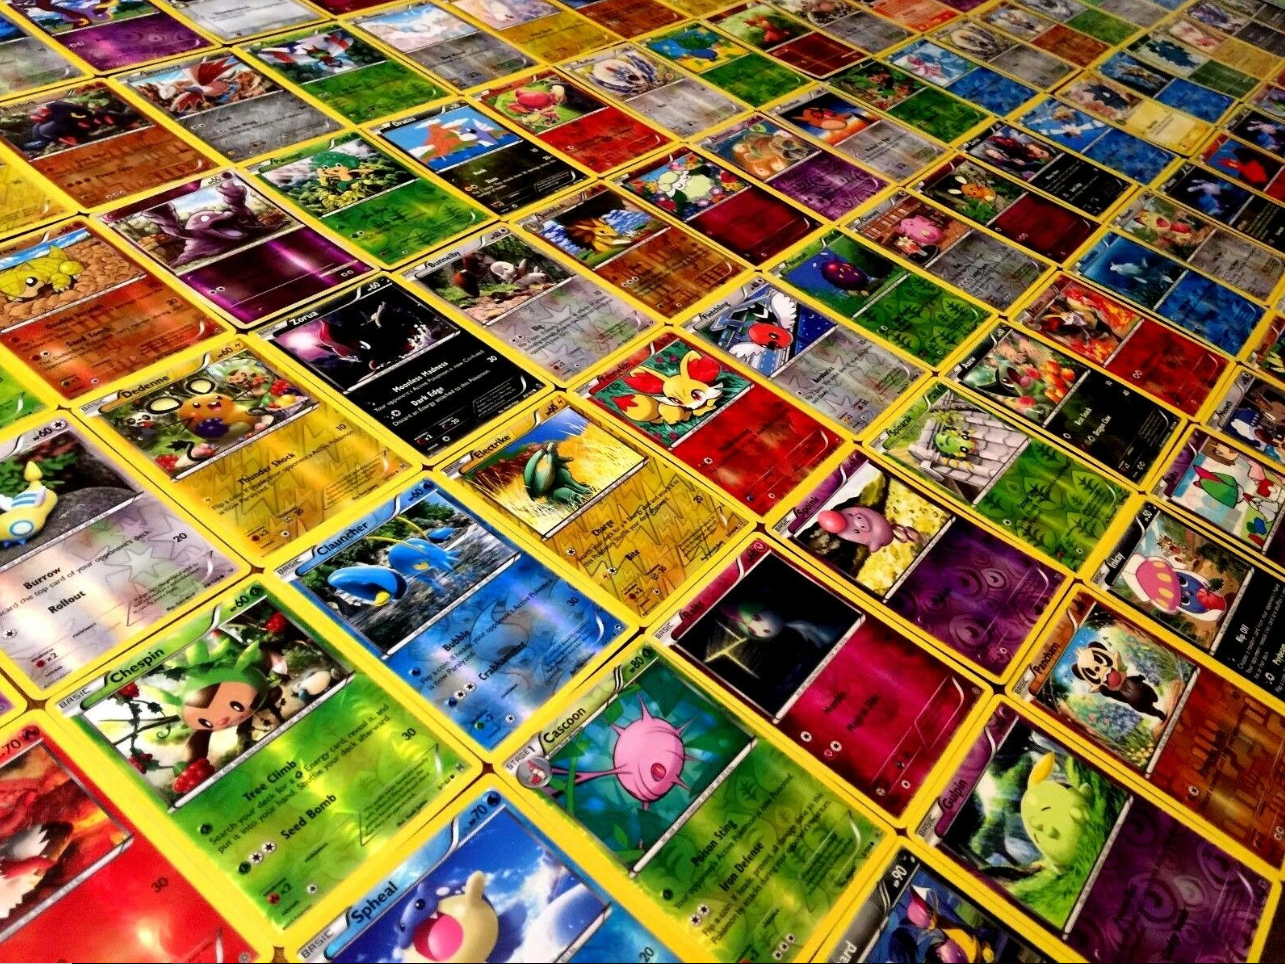 25 Rare Pokemon Cards with 100 HP or Higher (Assorted Lot with No Duplicates).